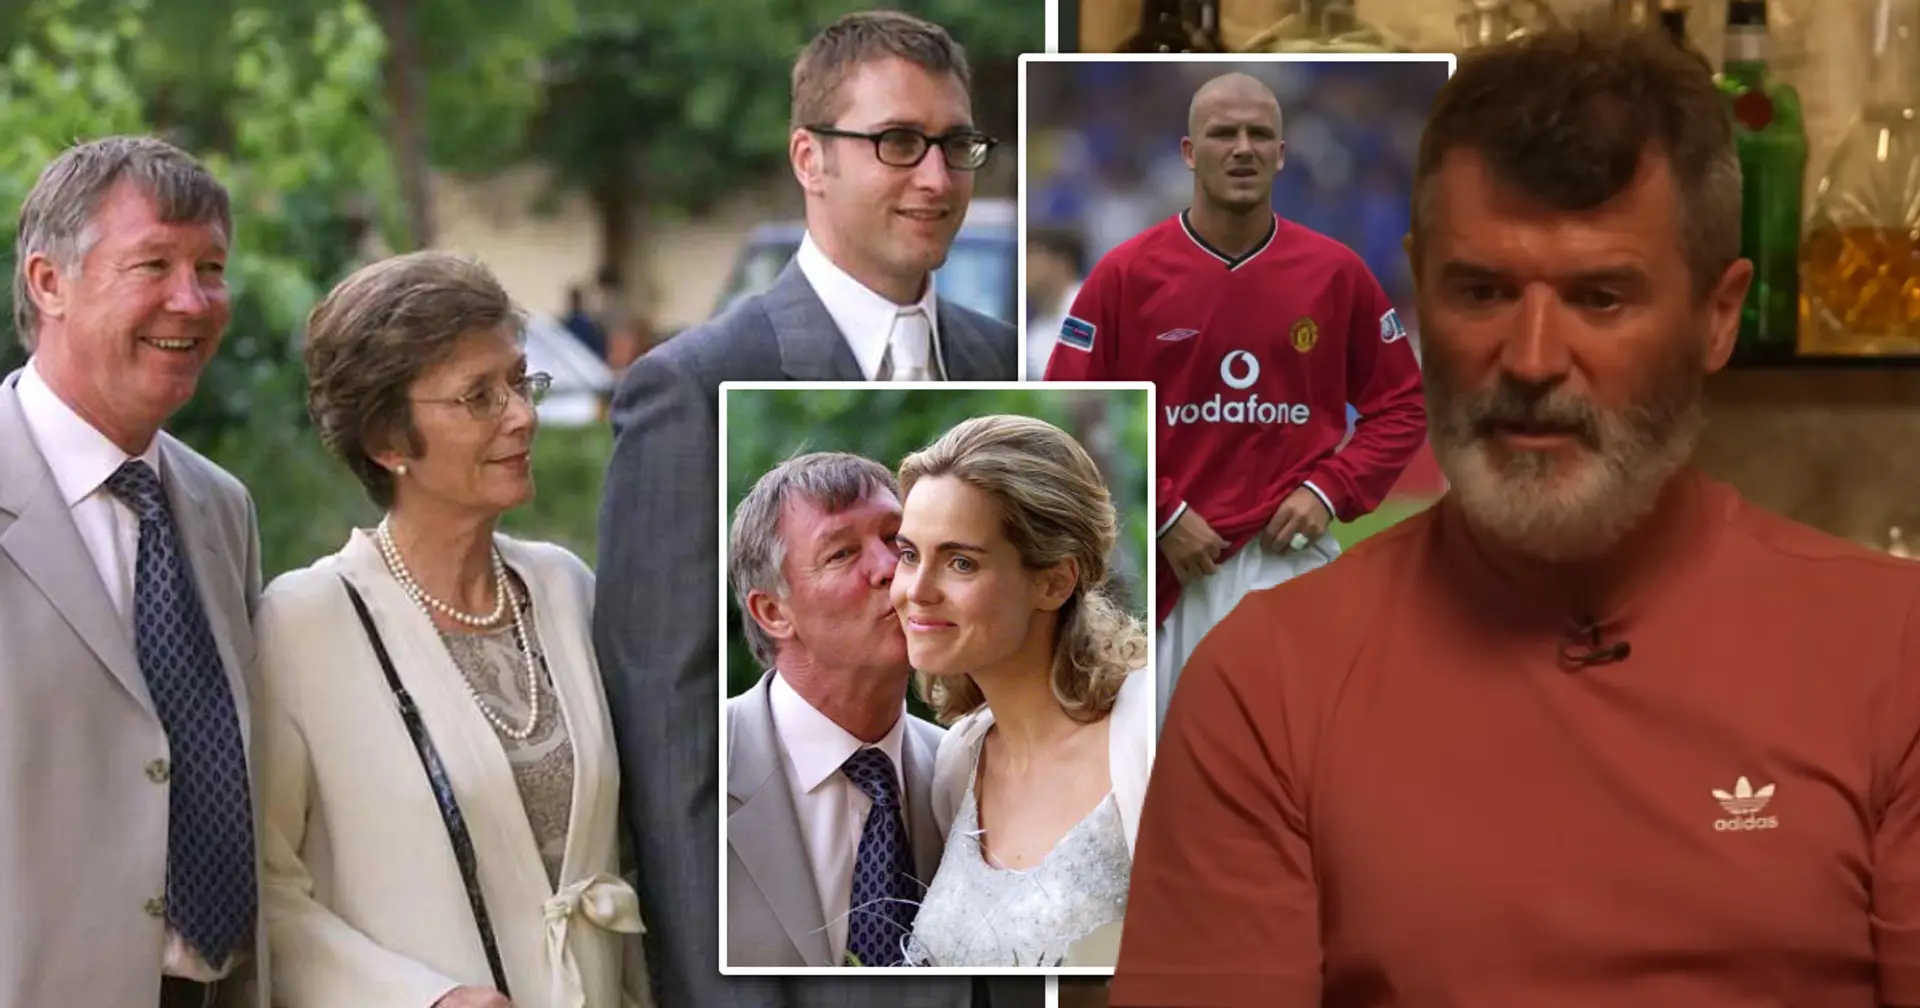 Roy Keane takes a dig at Sir Alex Ferguson for attending his son’s wedding over Manchester derby